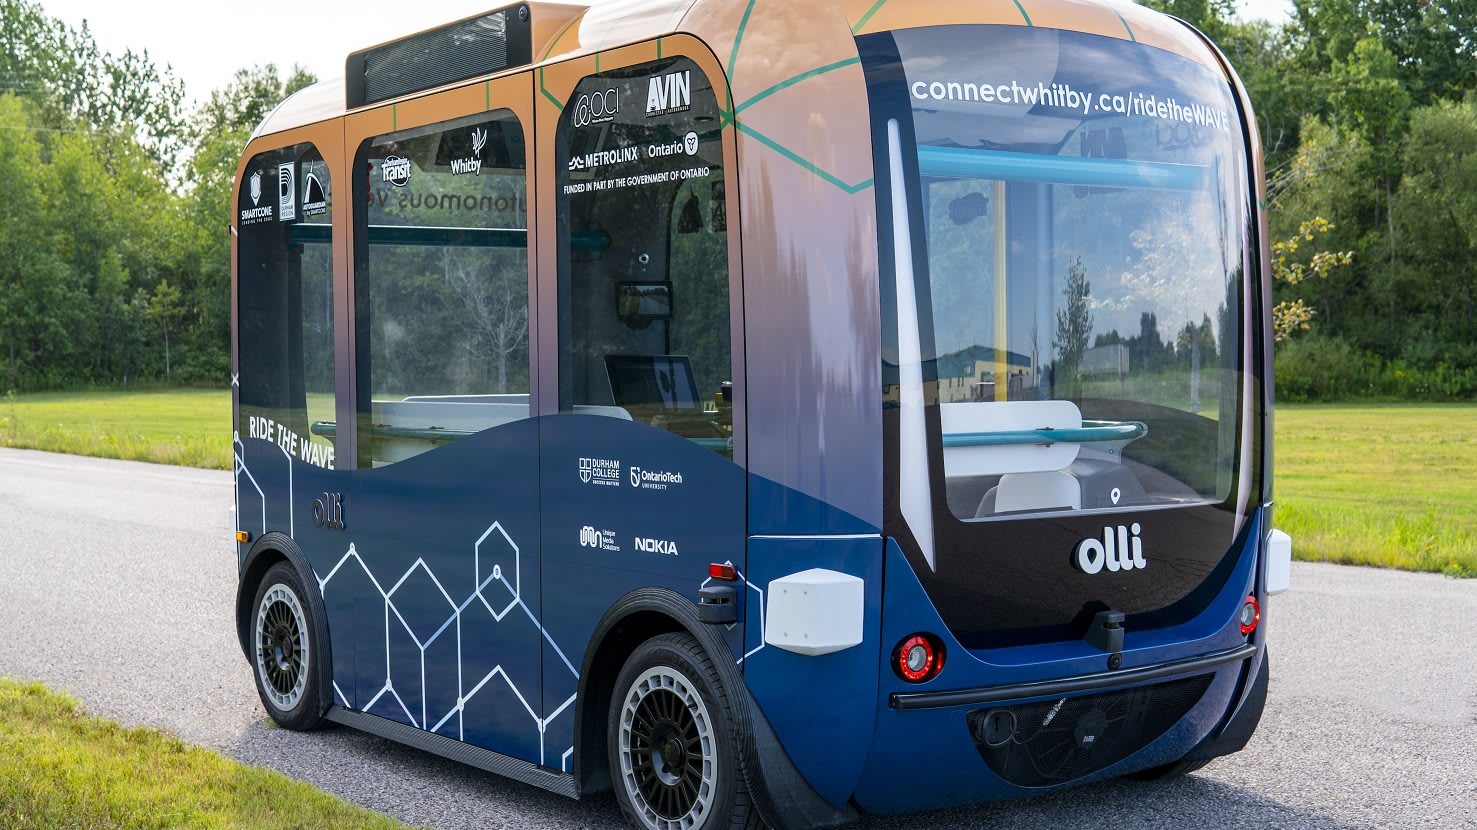 Self-driving electric shuttle heading to Whitby GO as part of AV pilot project